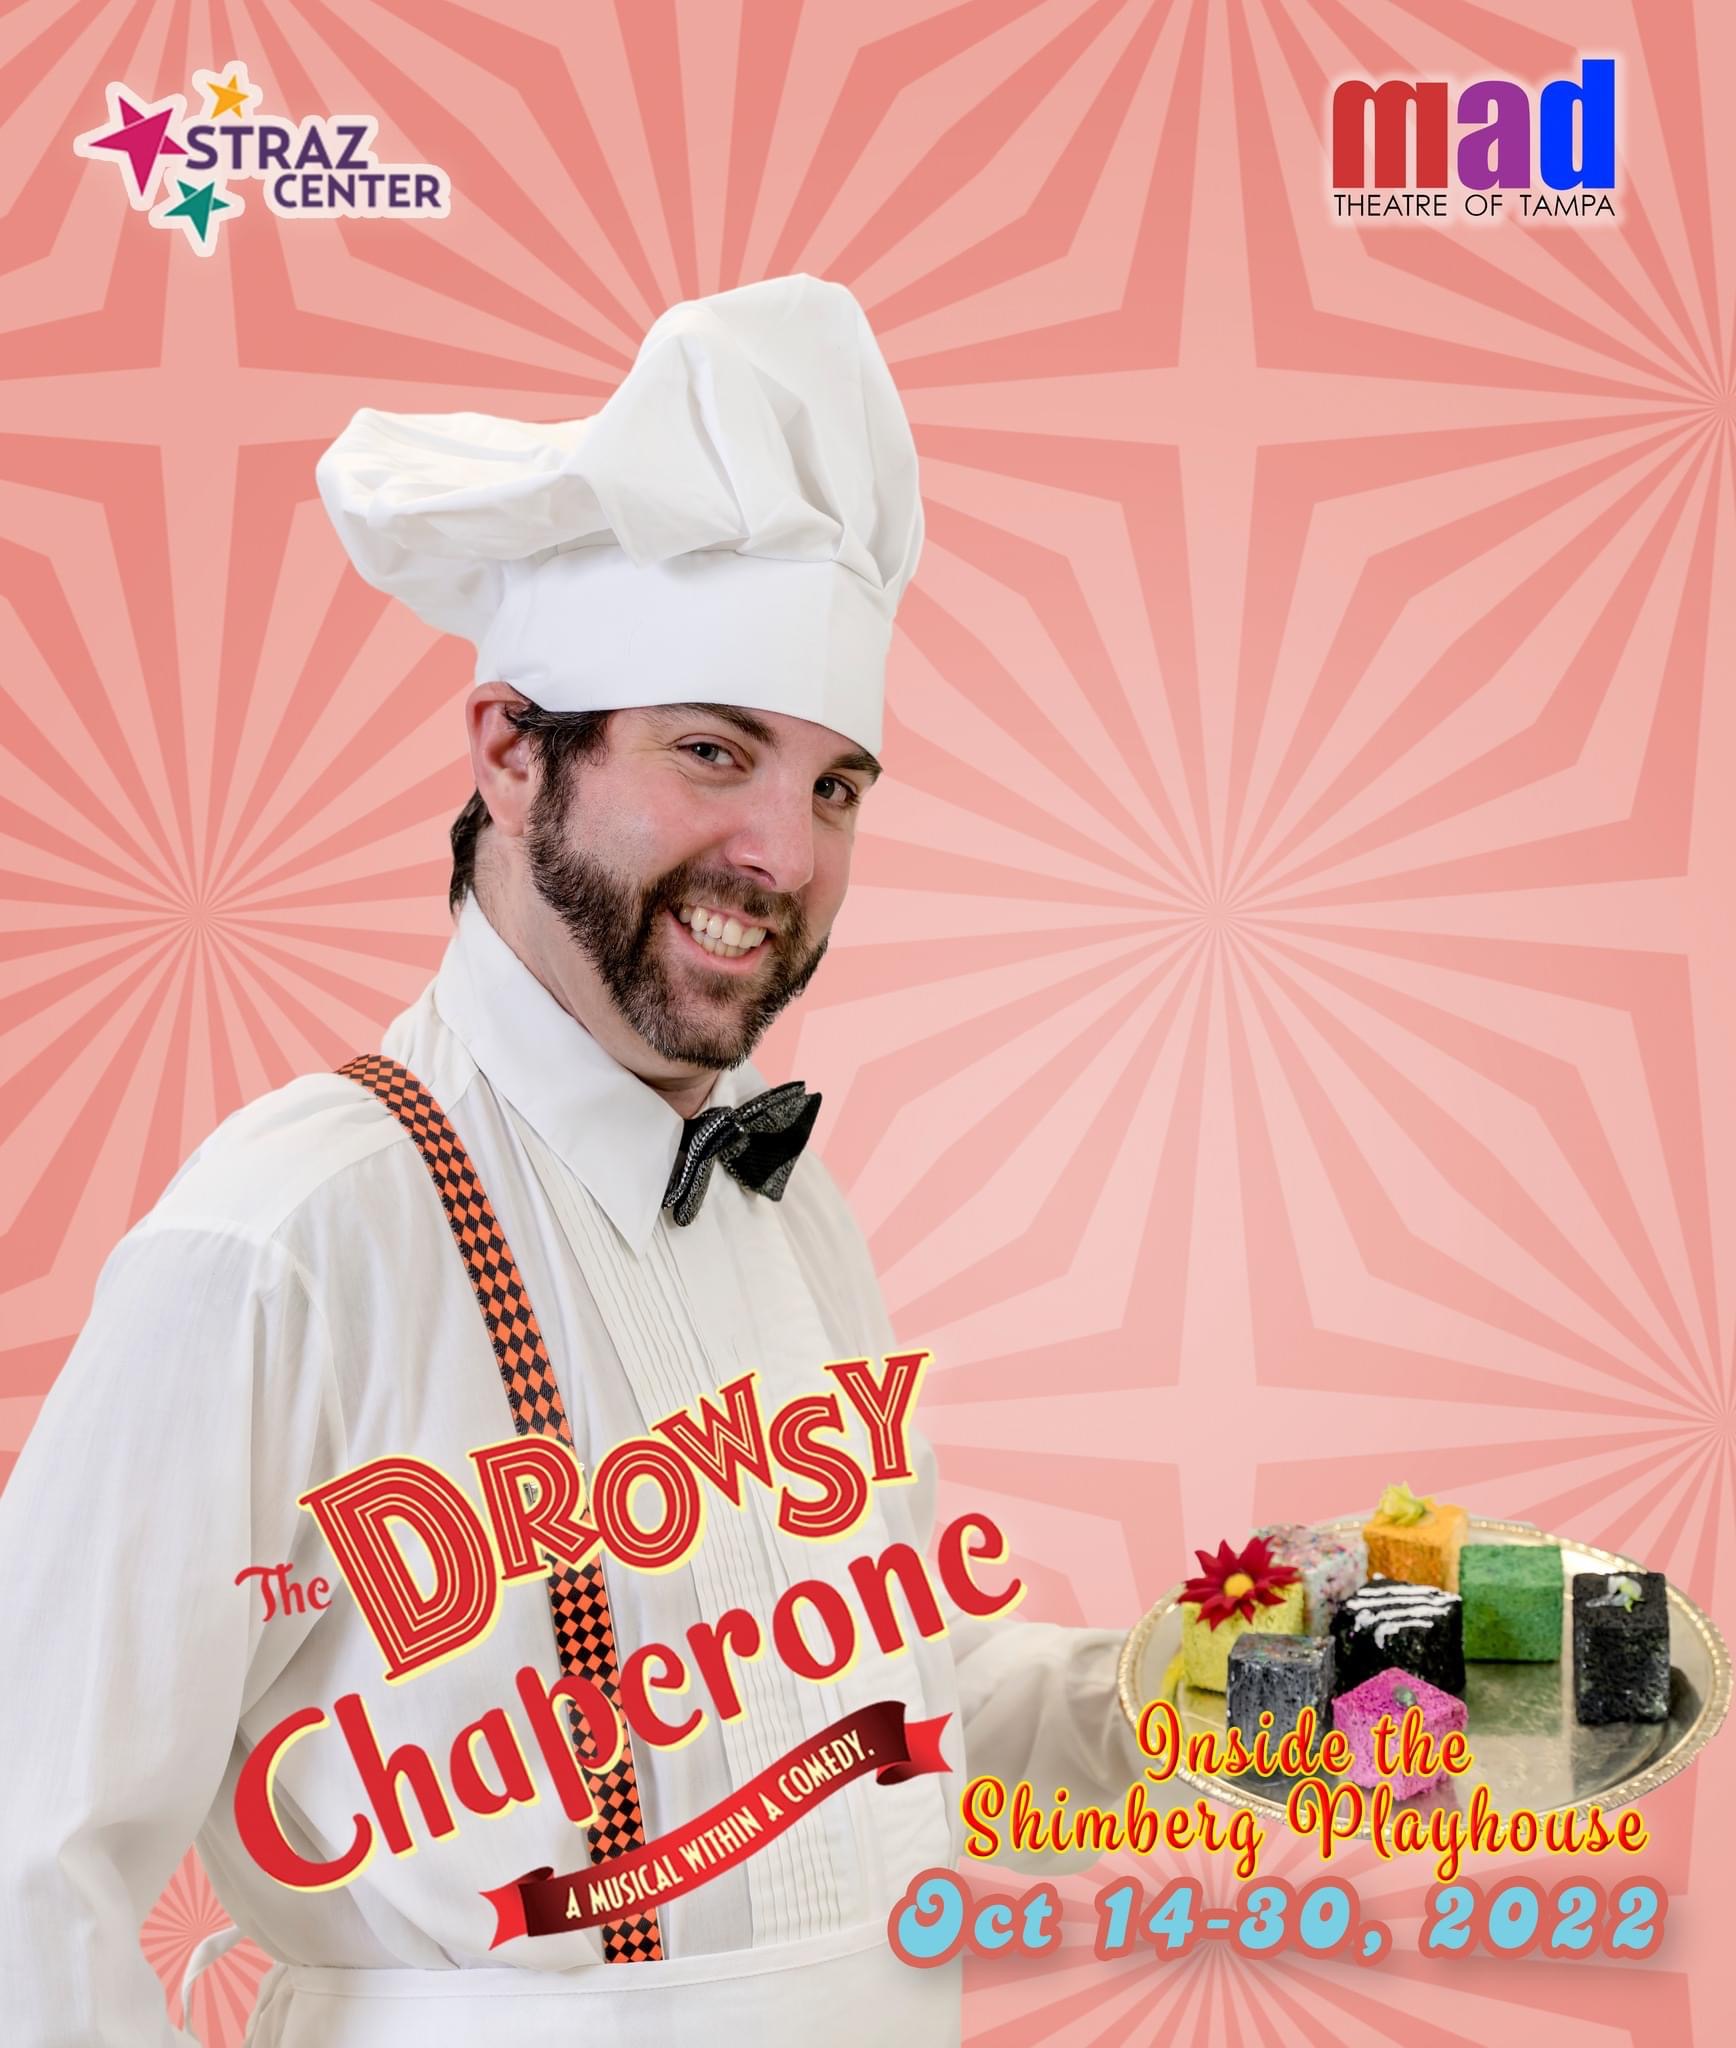 Meet Paulie as played by Ryan Farnworth in mad Theatre of Tampa’s “The Drowsy Chaperone